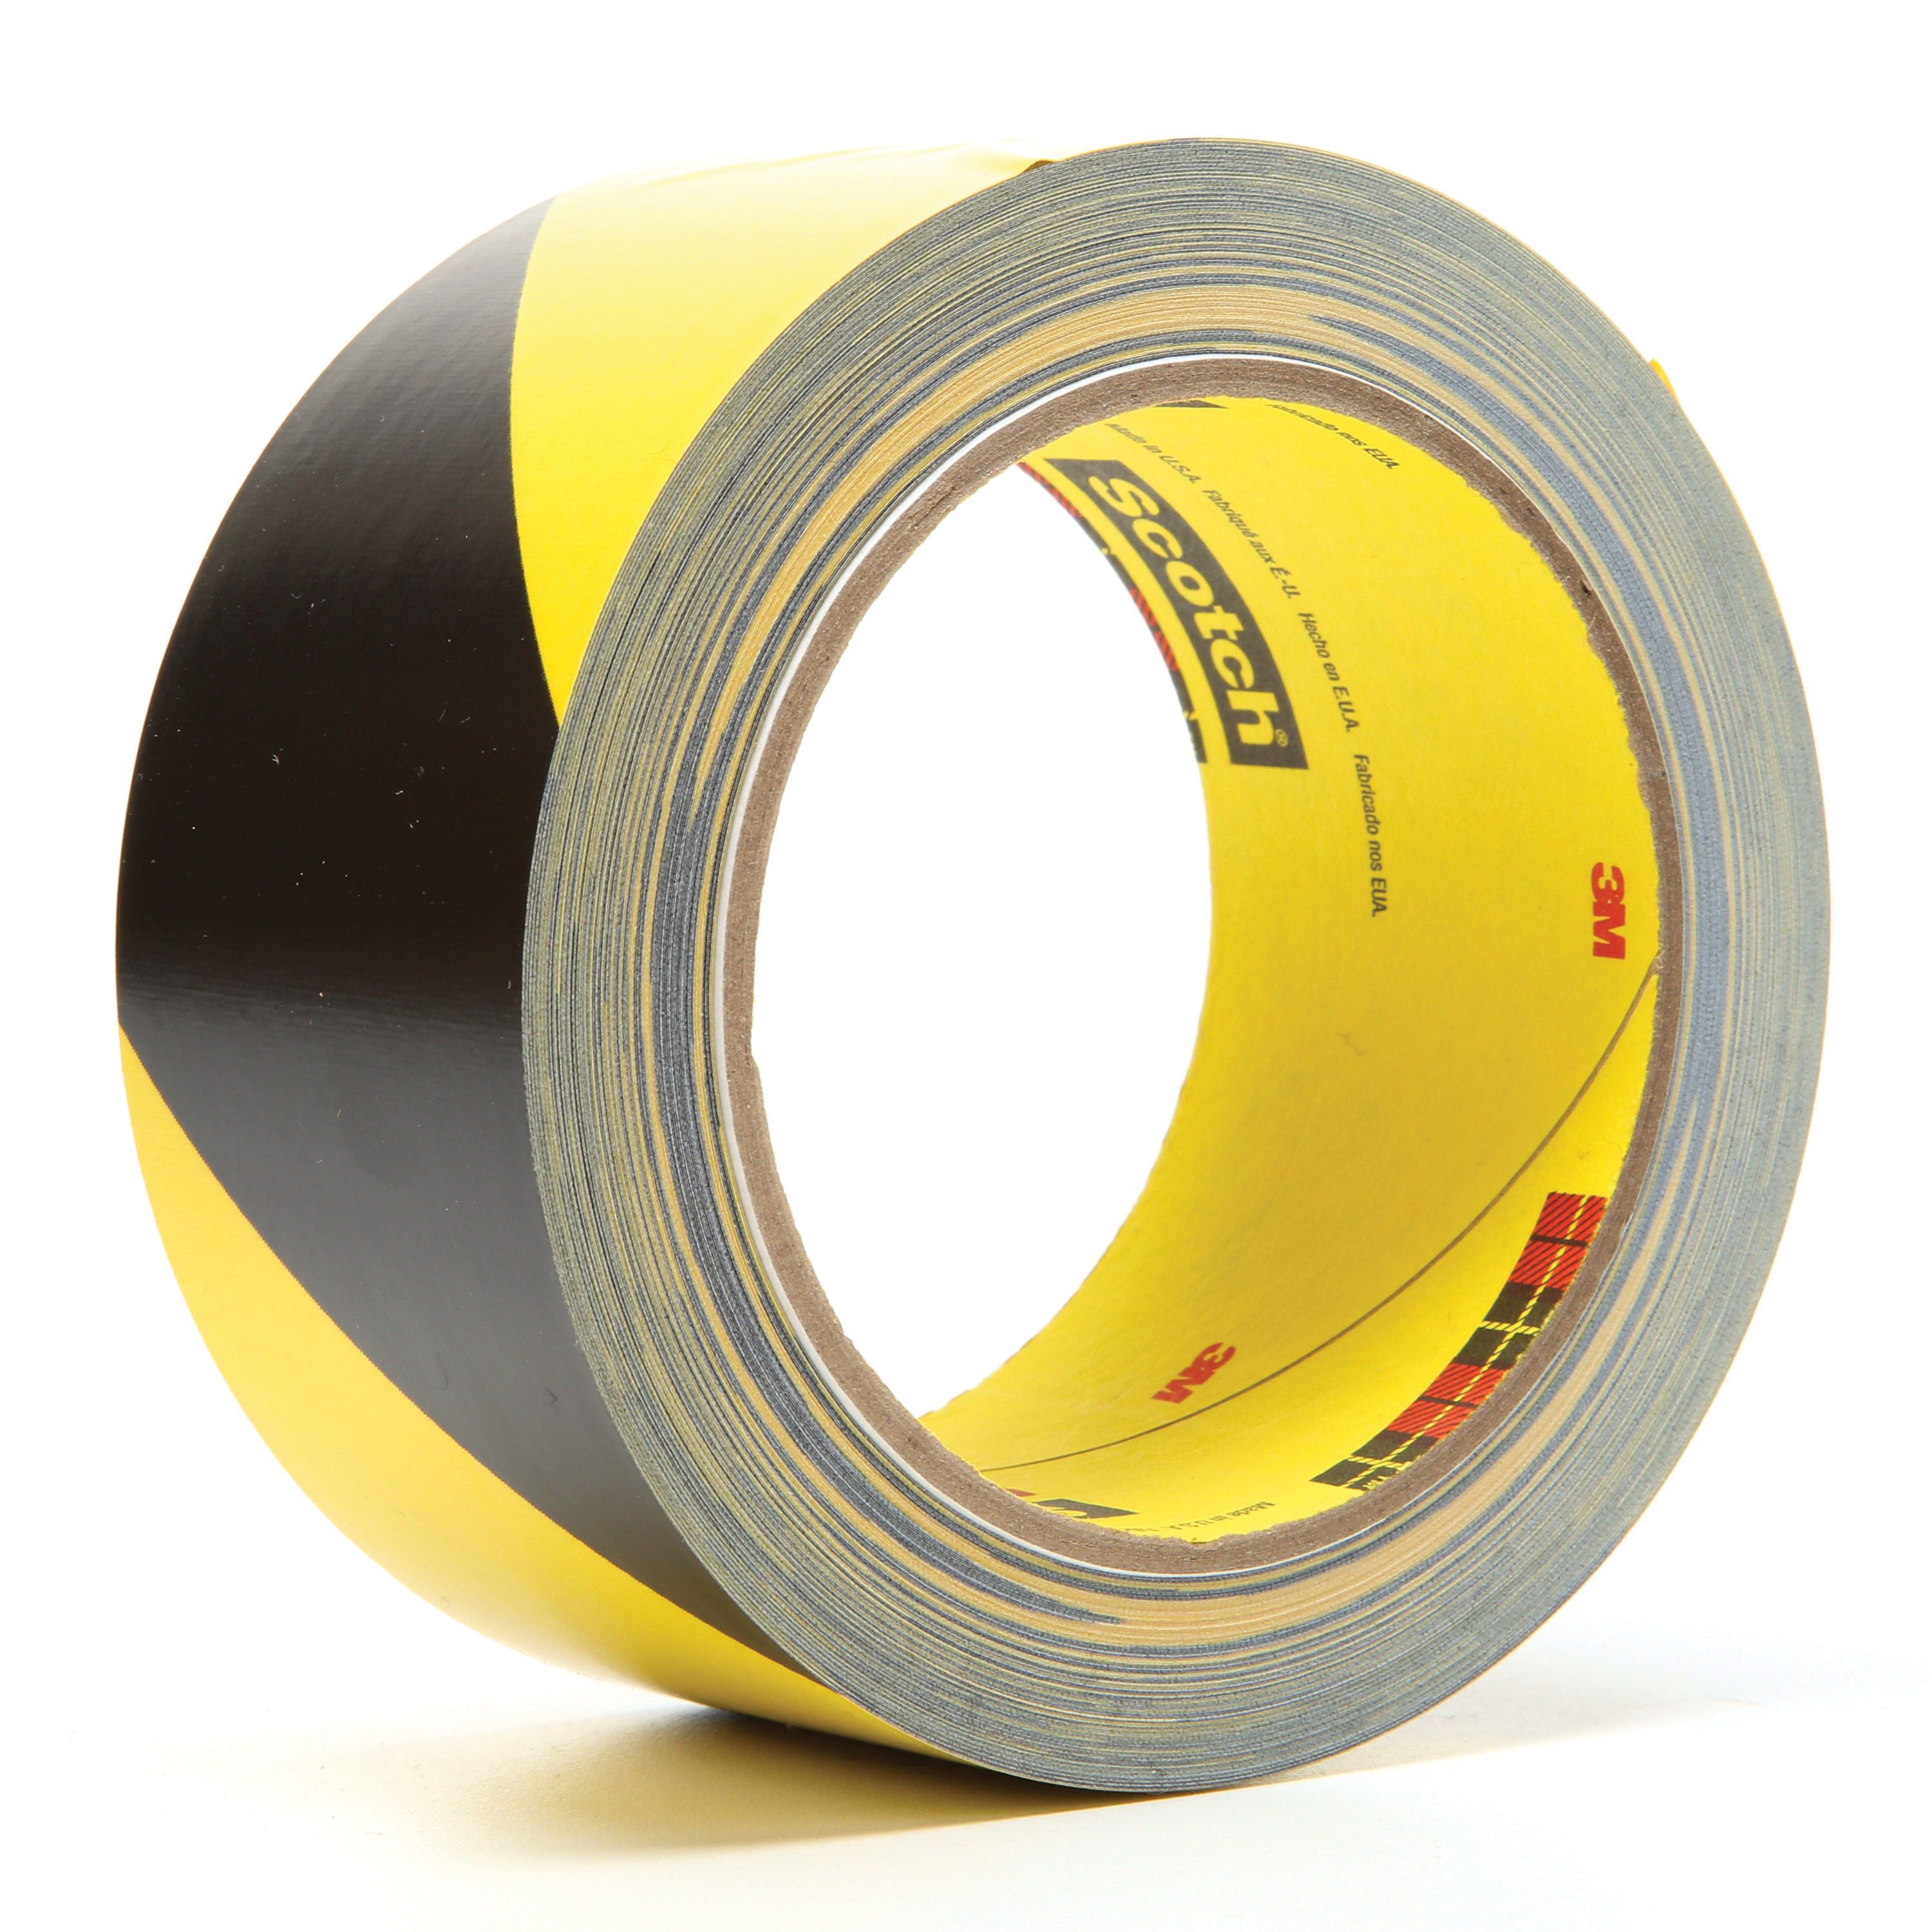 3M™ 021200-04585 5702 Safety Stripe Tape, 36 yd L x 2 in W, Black/Yellow, Rubber Adhesive/Vinyl Backing